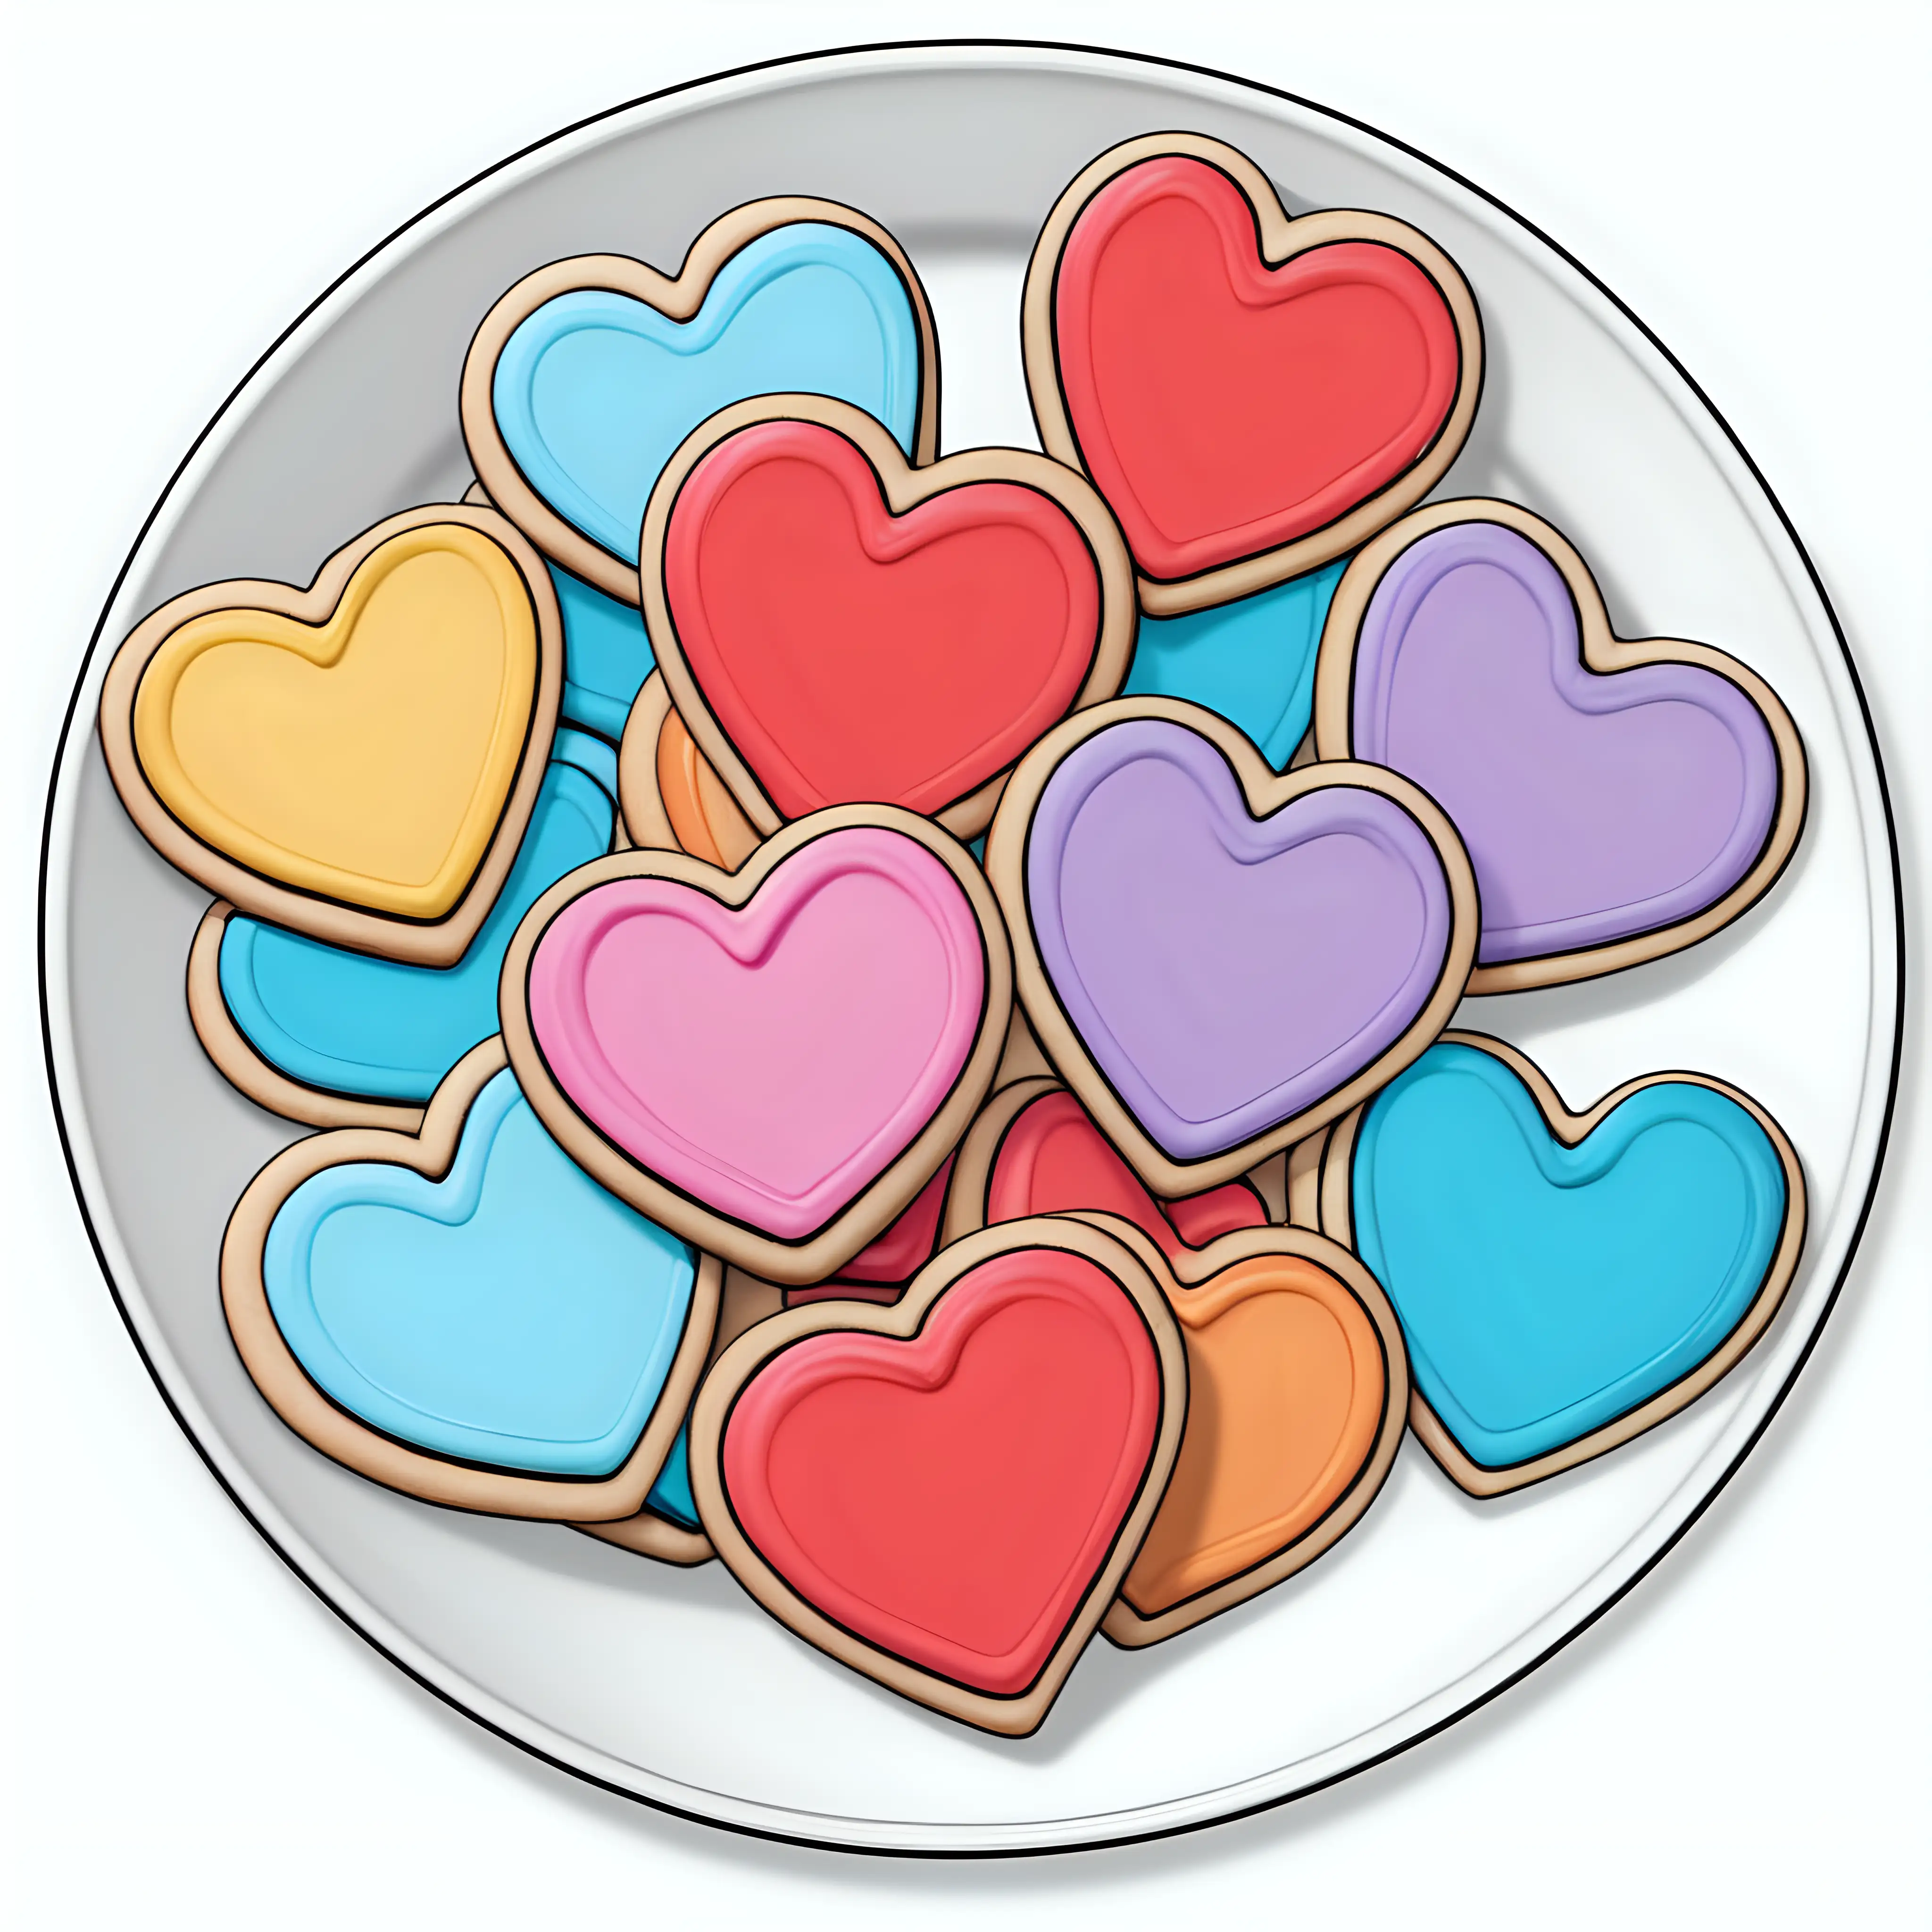 Heart-Shaped Cookies: A plate of heart-shaped cookies ready to be decorated with colorful icing for for coloring book with crisp lines and white background. Make it an easy to color design for children. --ar 17:22